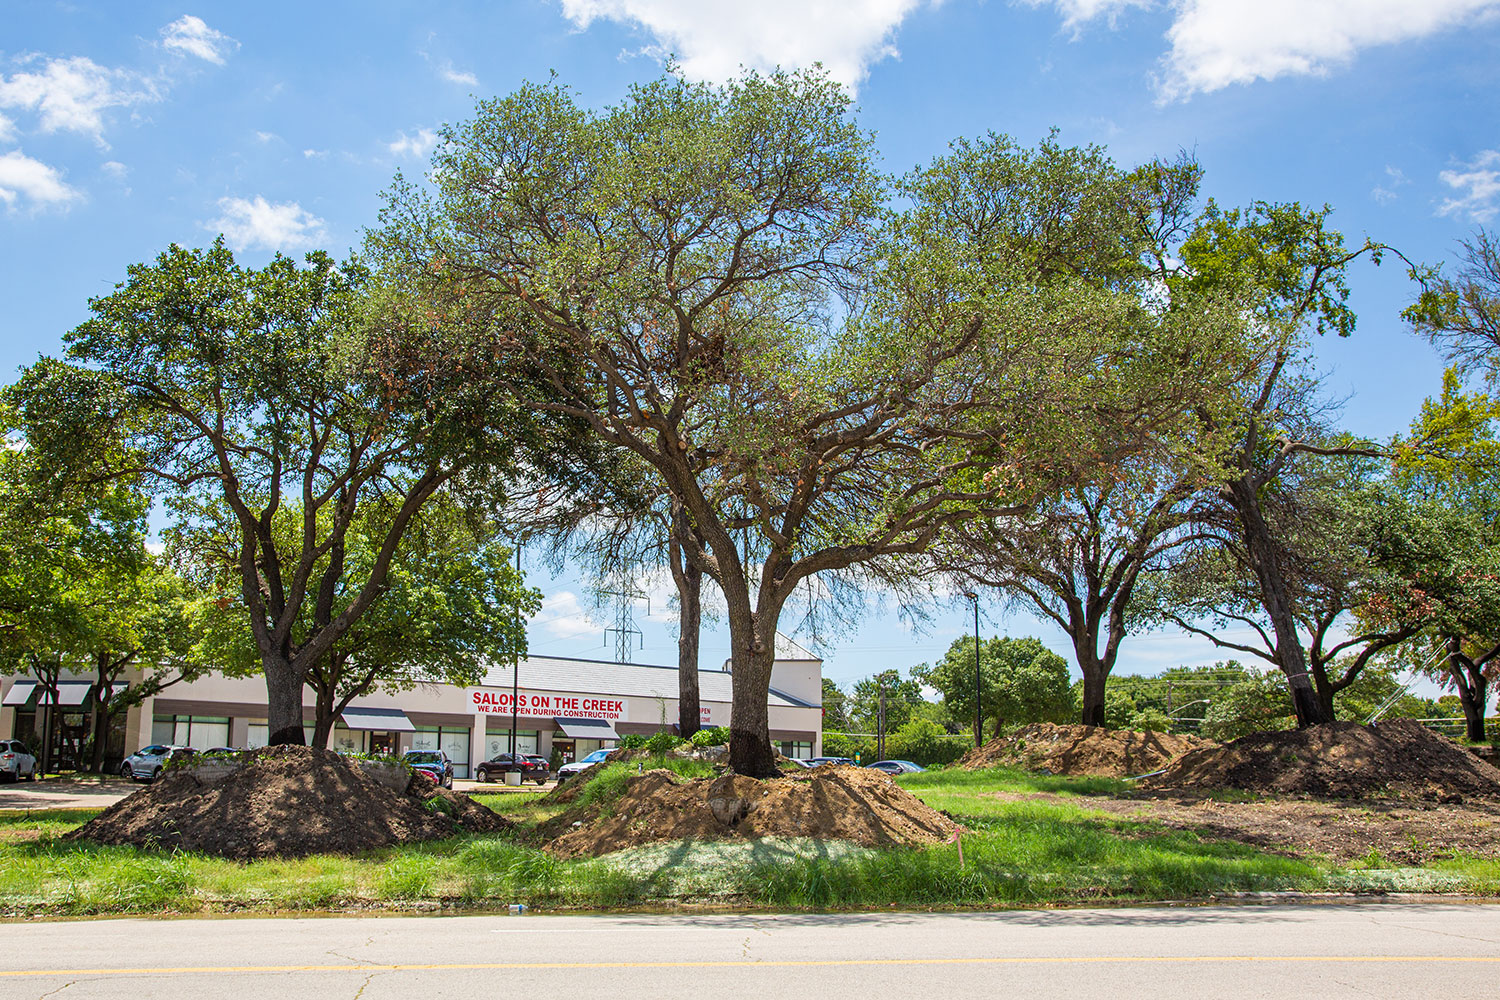 Relocated trees will be replanted in the finished development // photos Jennifer Shertzer